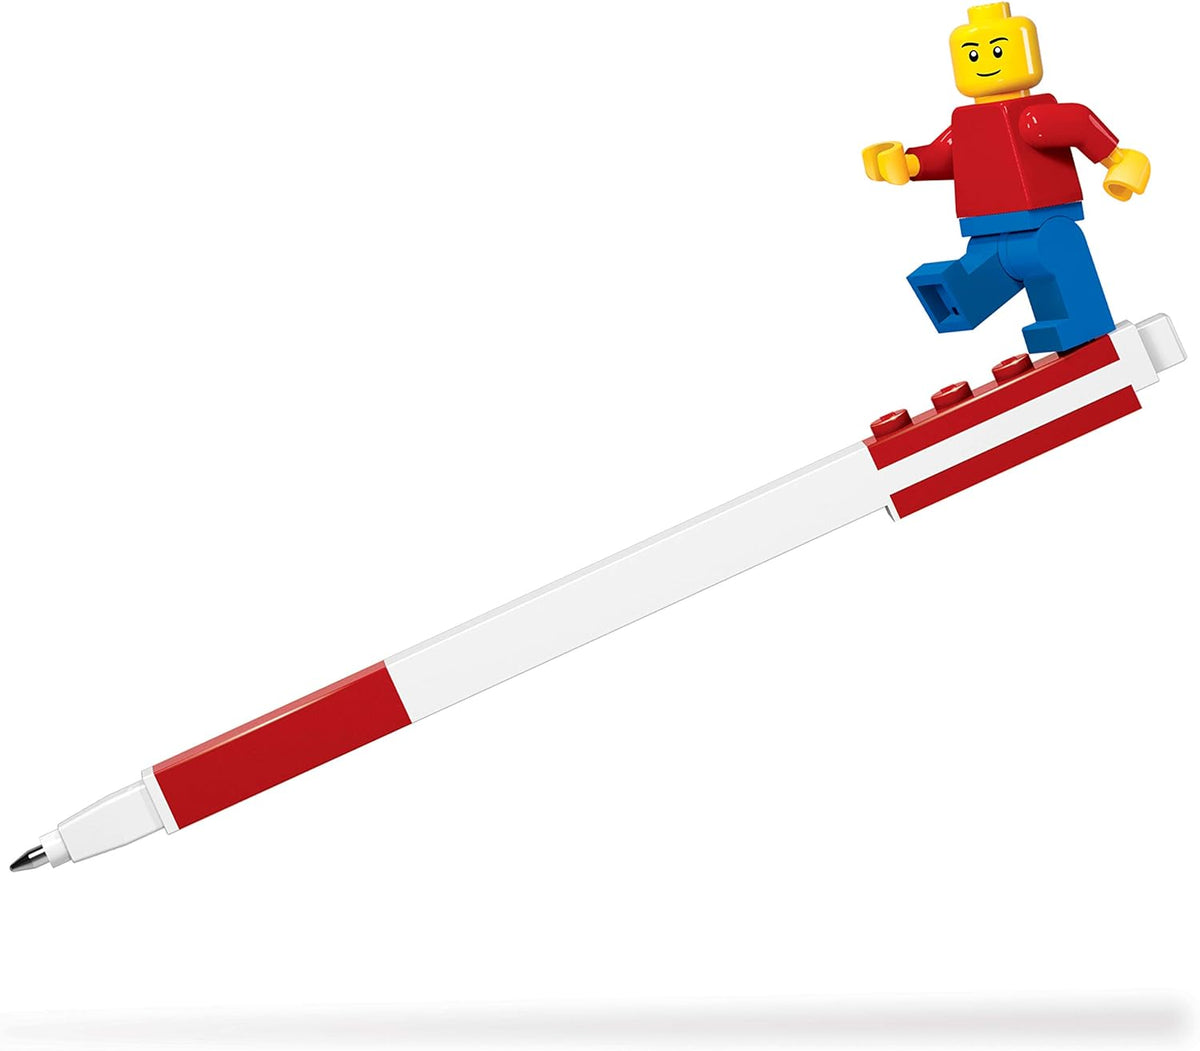 Lego Iconic Gel Pen With Minifigure - Red